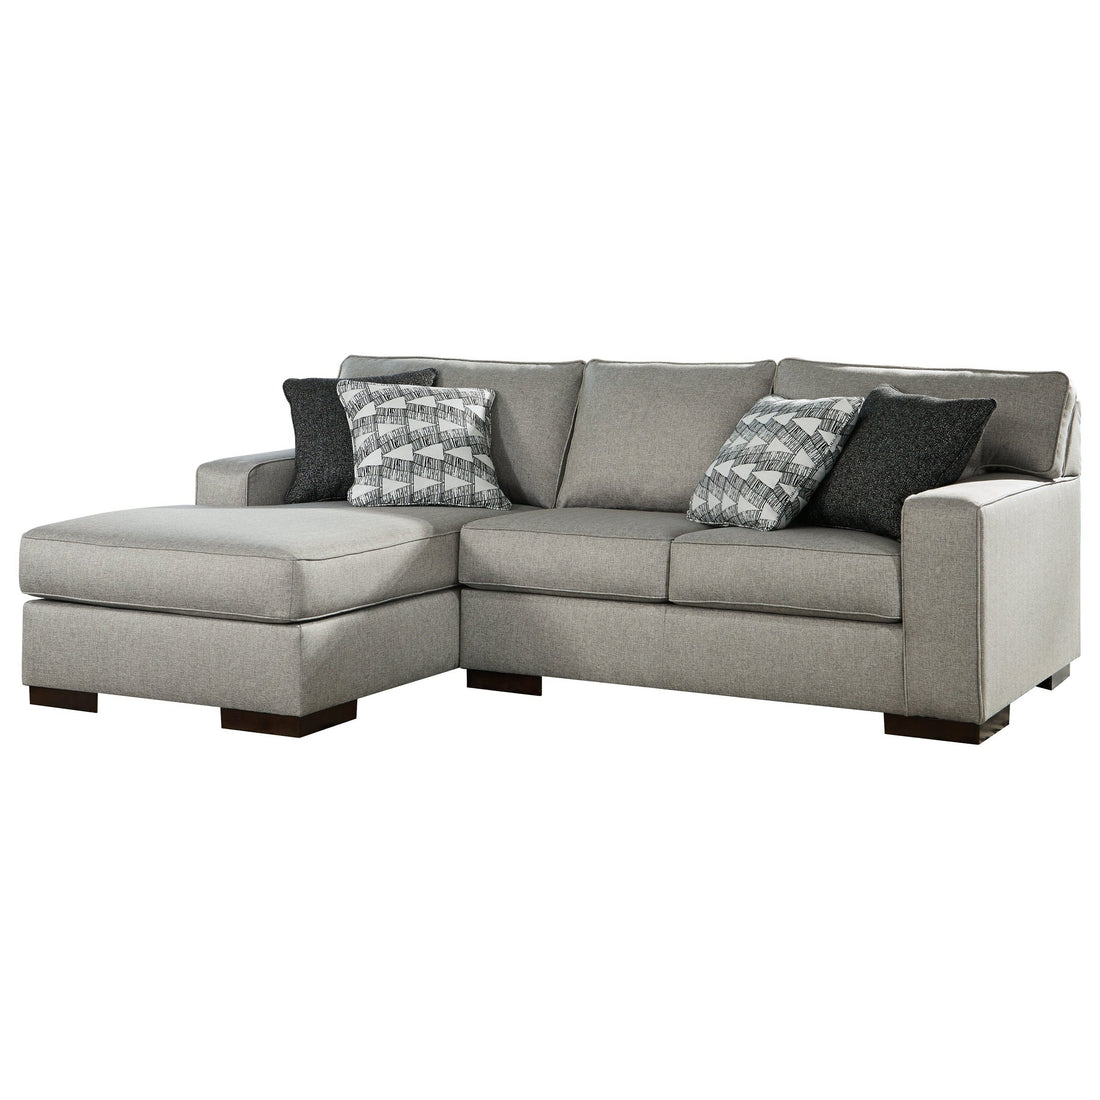 Marsing Nuvella 2-Piece Sectional with Chaise Ash-41902S1